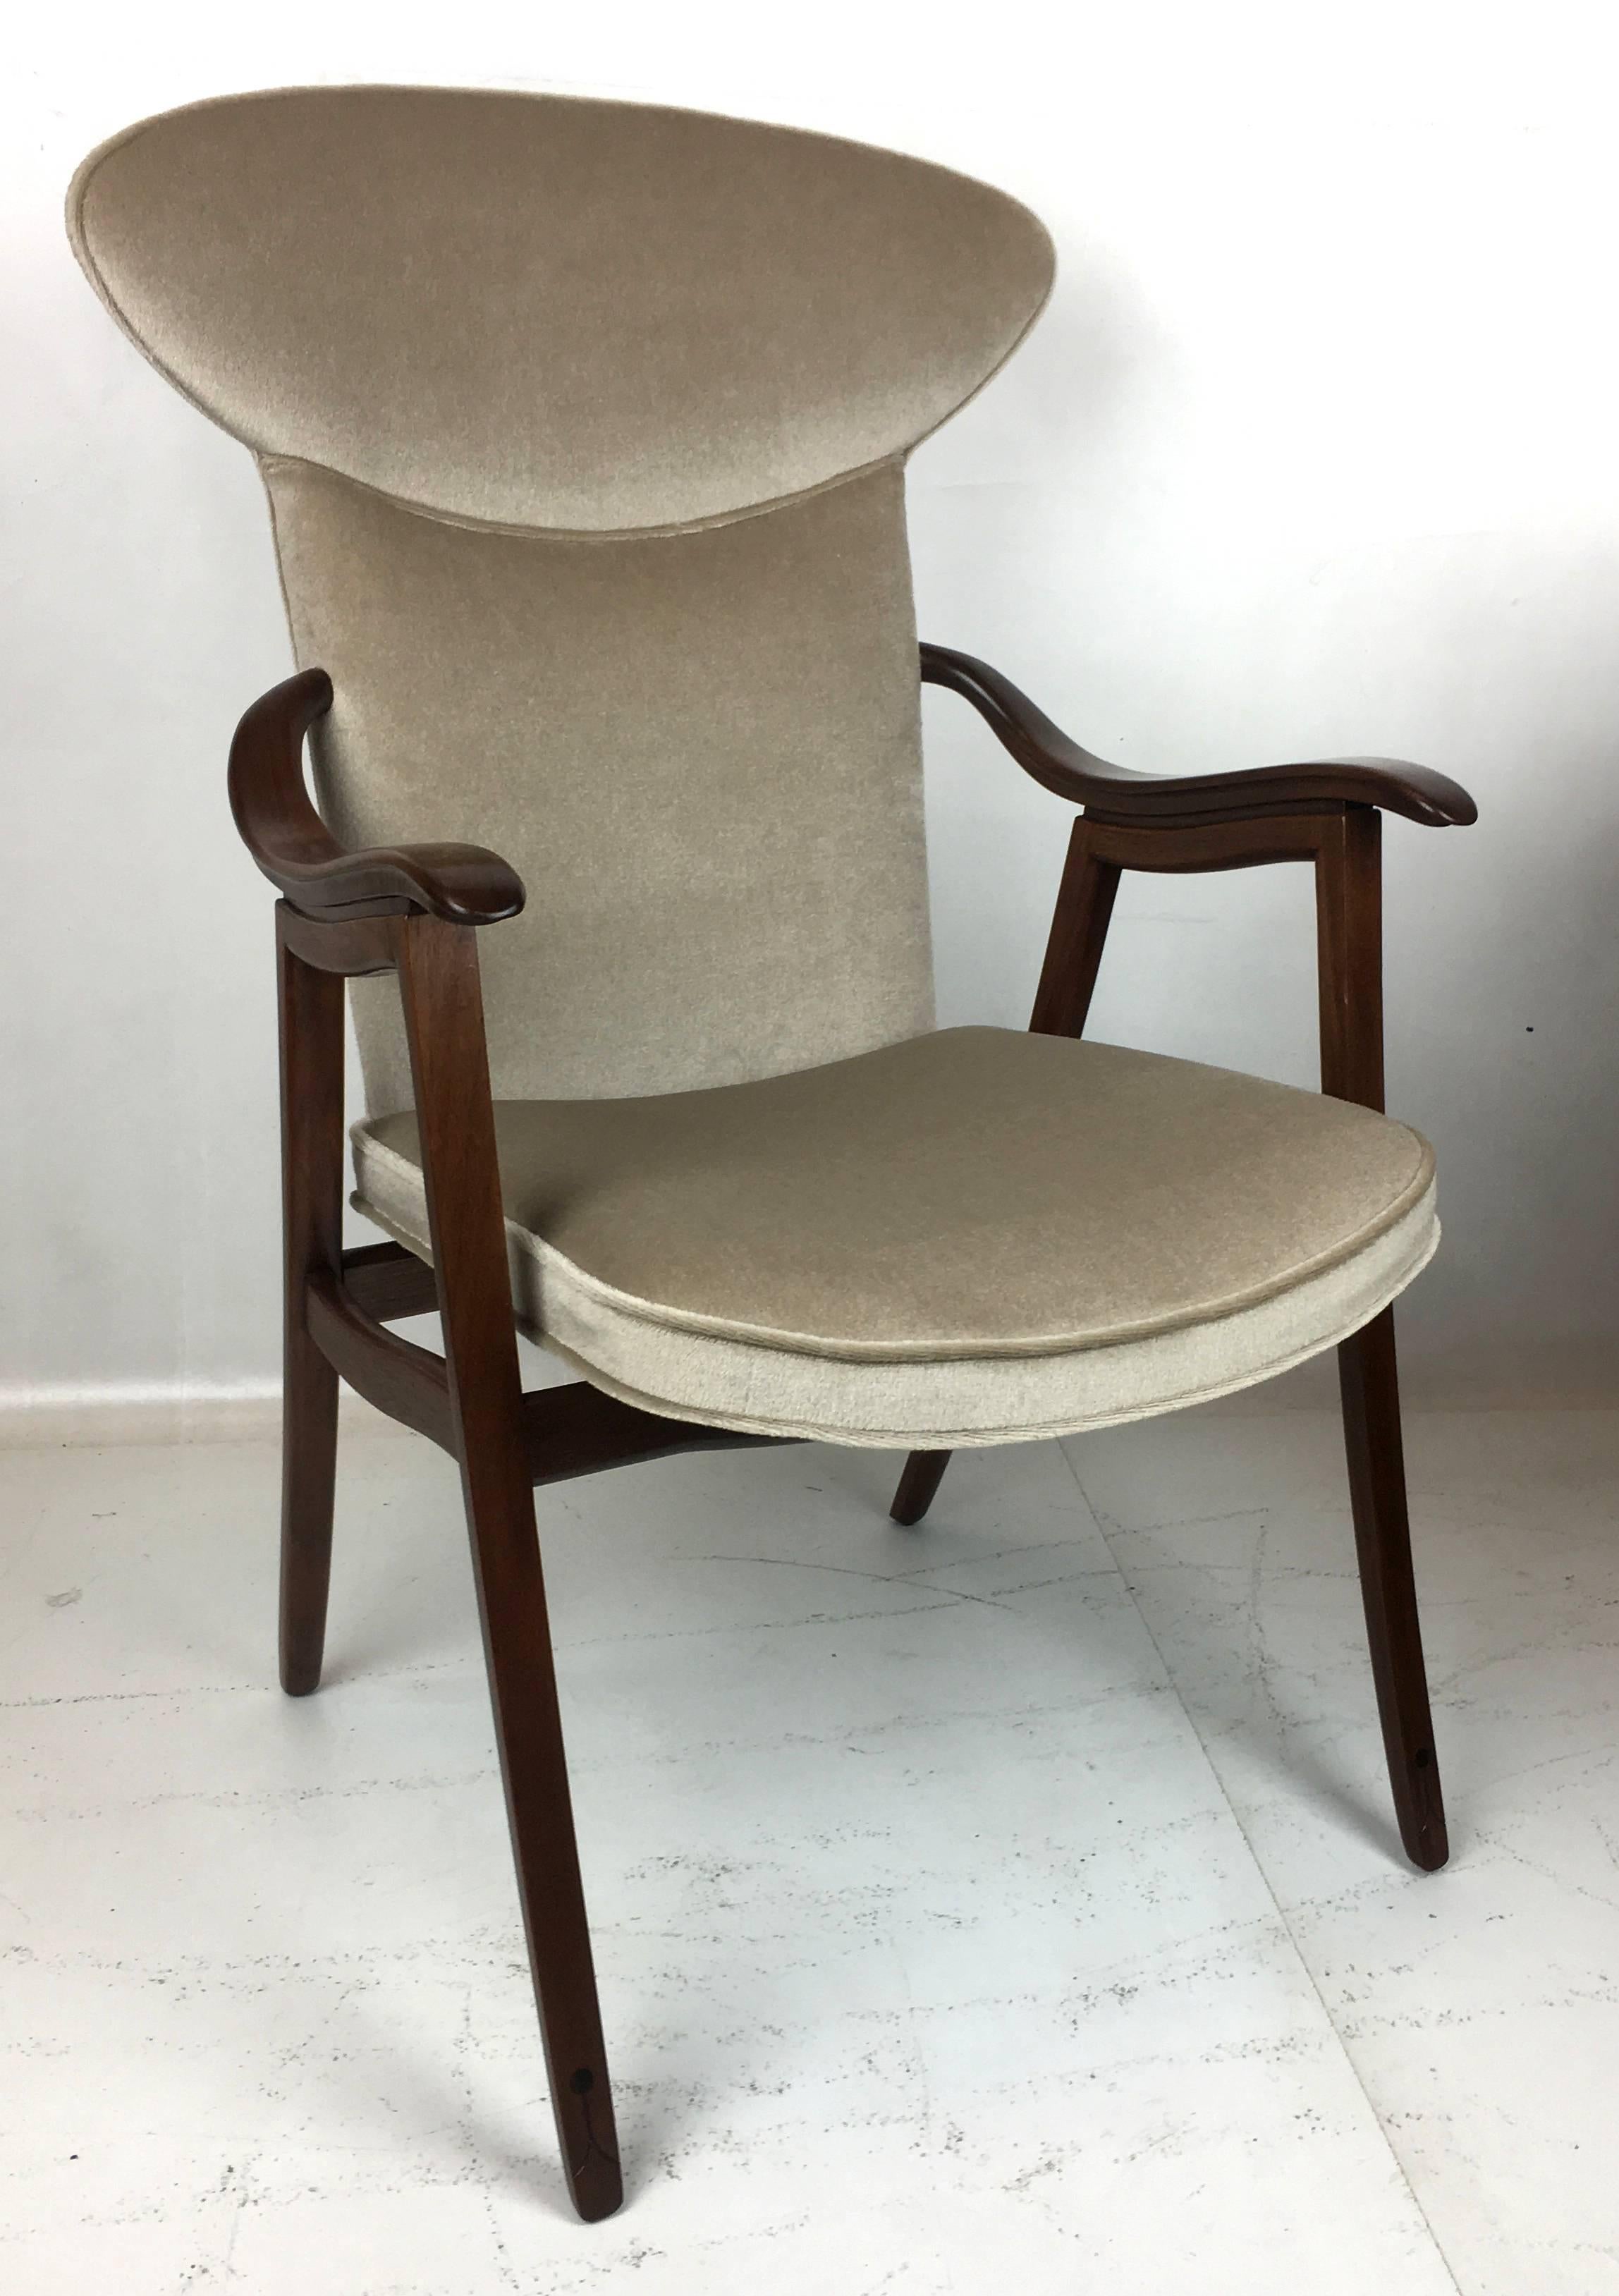 
This beautifully crafted set of four wingback Walnut Dining chairs was custom made for the Executive offices of Owens-Corning, attributed to Edward Wormley for Dunbar Furniture Co.. The chairs and their construction, materials hardware, and